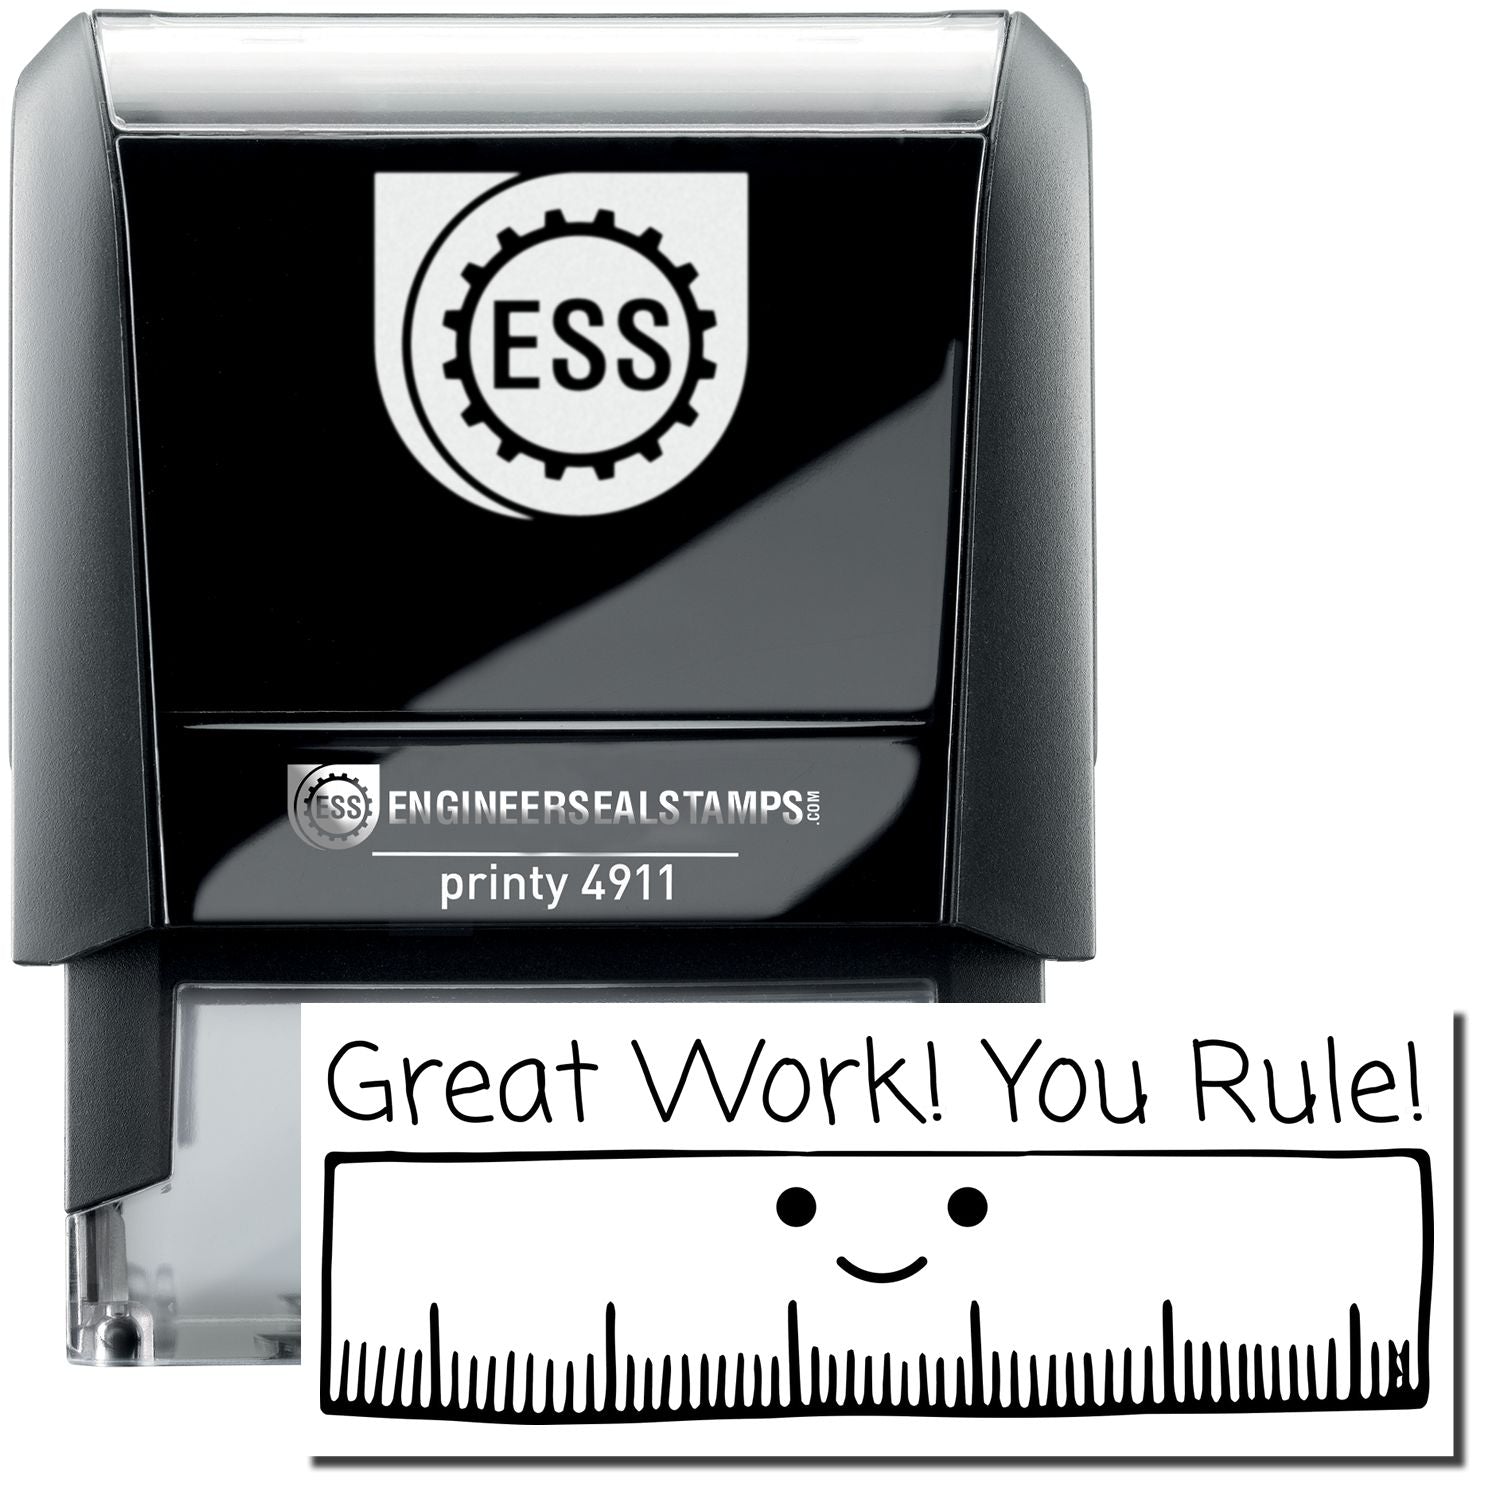 A self-inking stamp with a stamped image showing how the text "Great Work! You Rule!" (with a large image of a ruler with a smiling face underneath) is displayed after stamping.